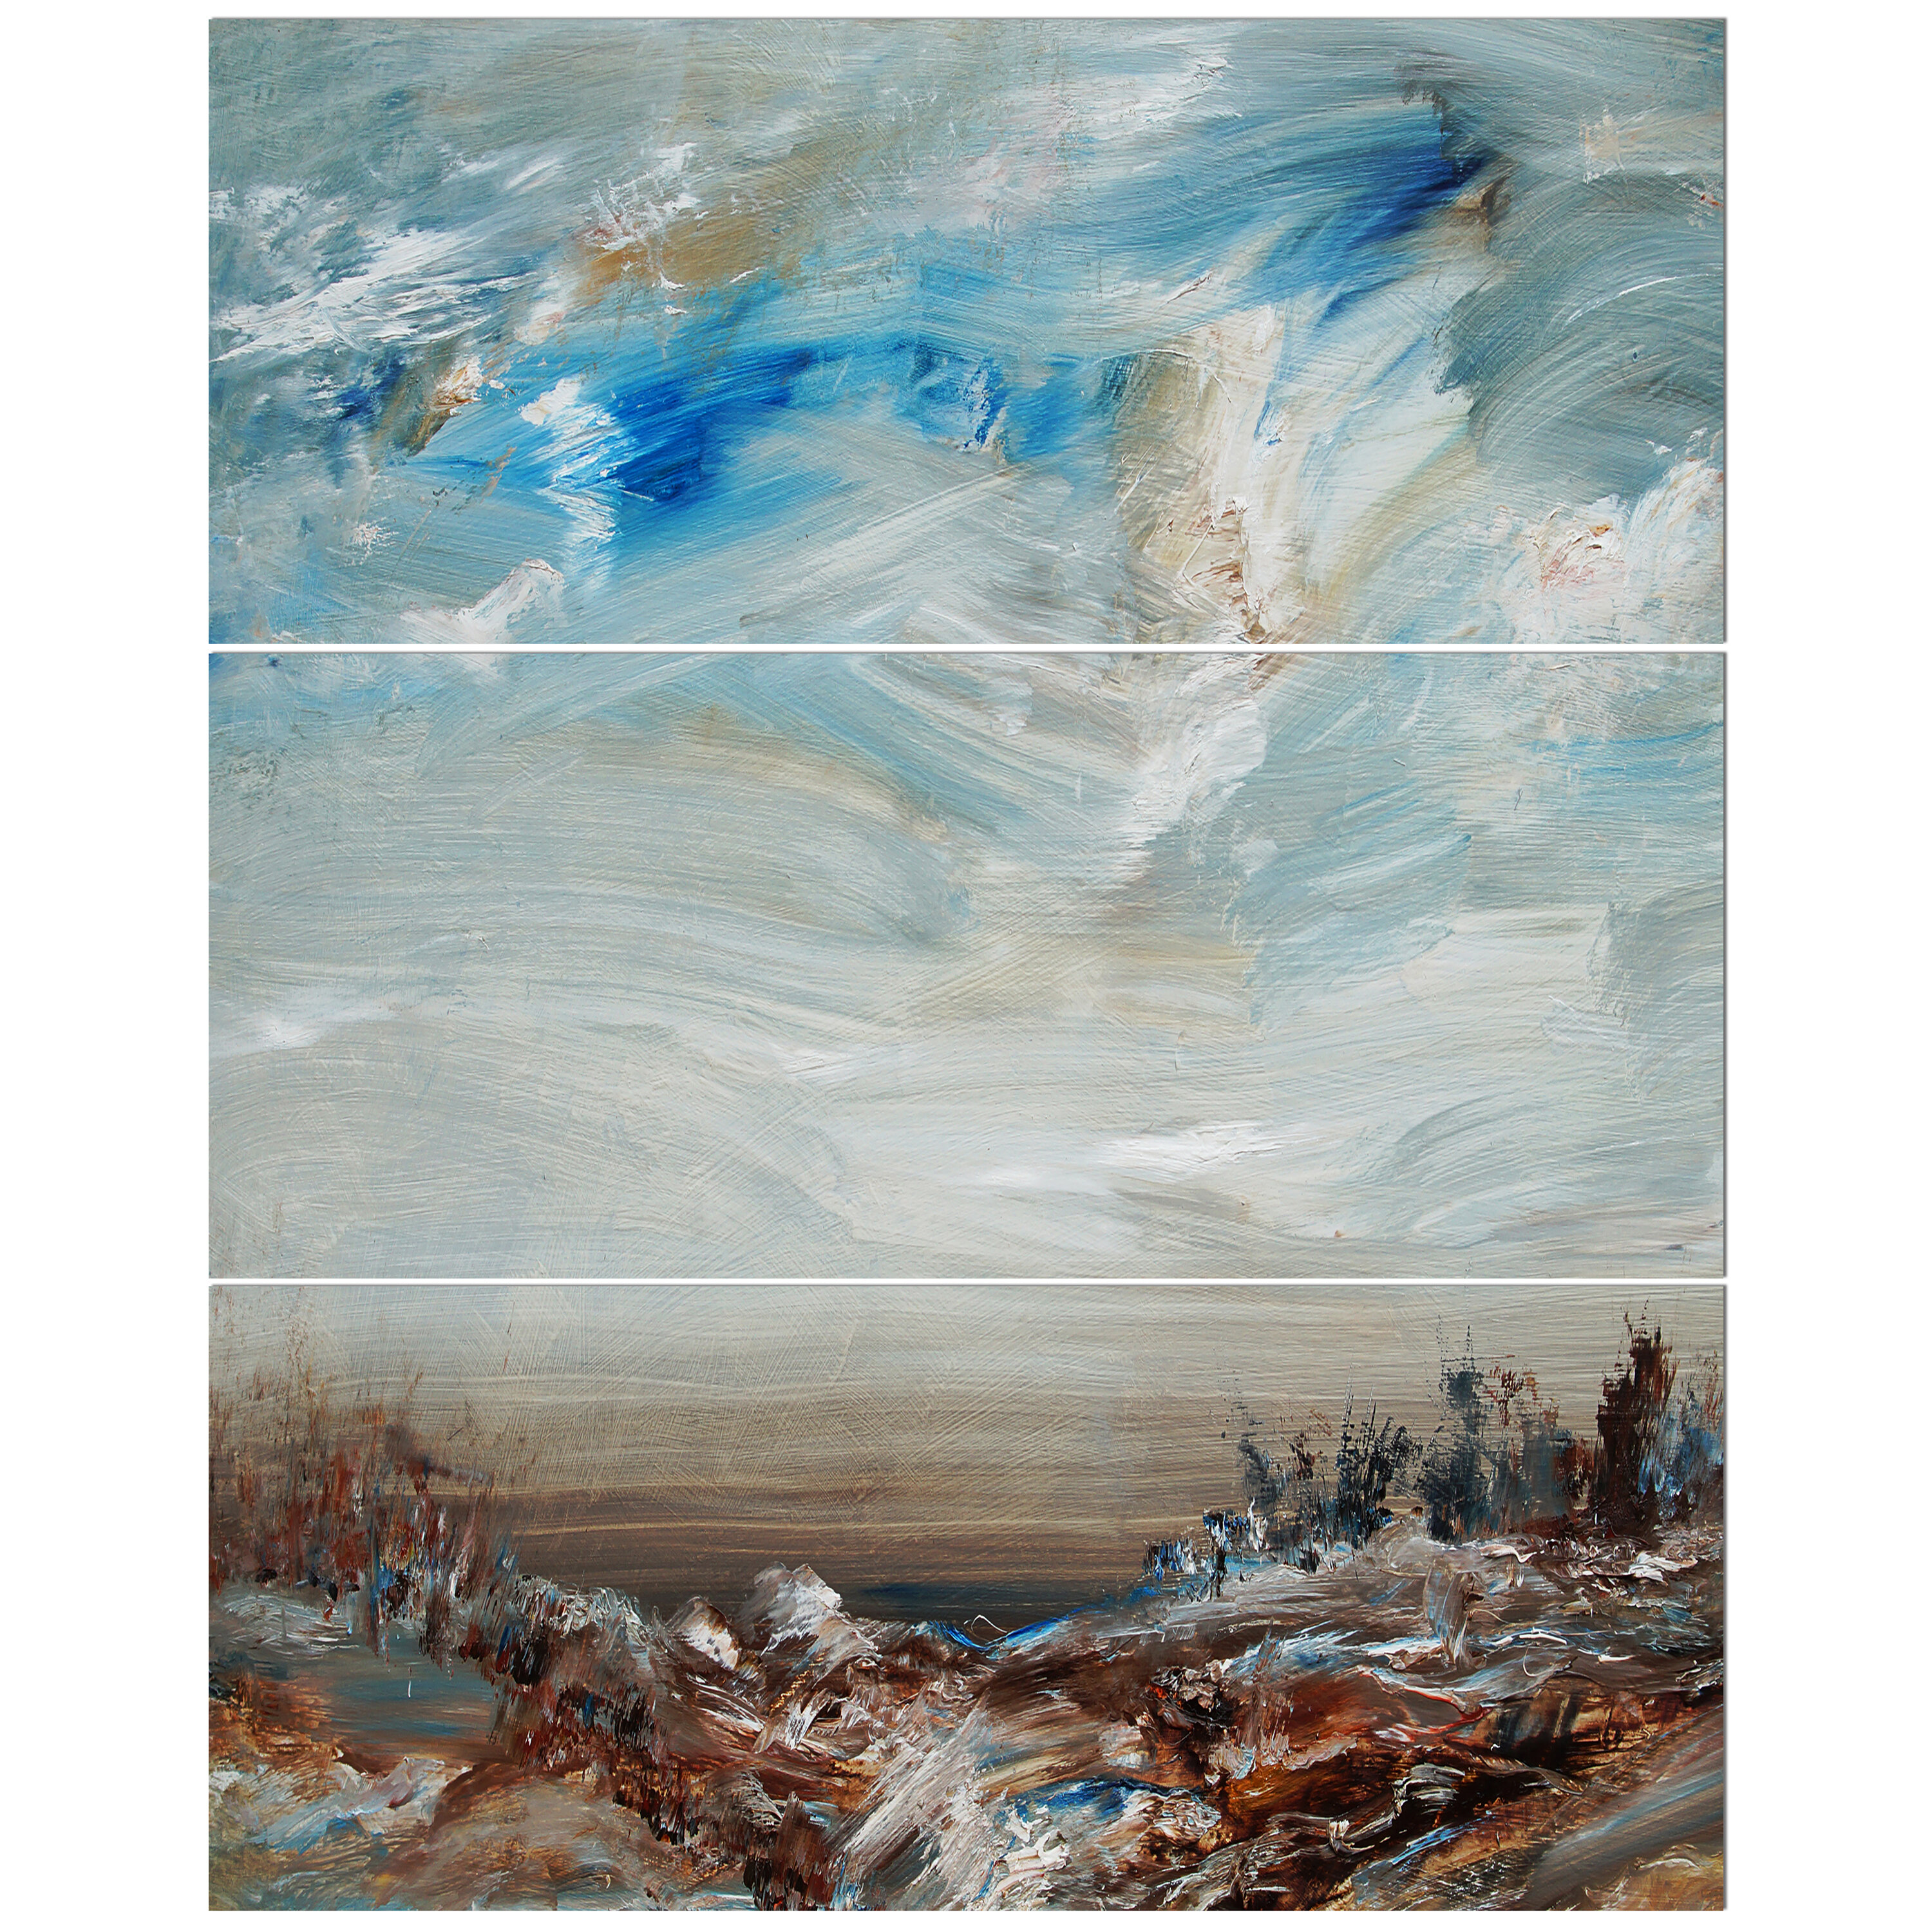 East Urban Home Cloudy Sky In Oil Painting Oil Painting Print Multi Piece Image On Wrapped Canvas Wayfair